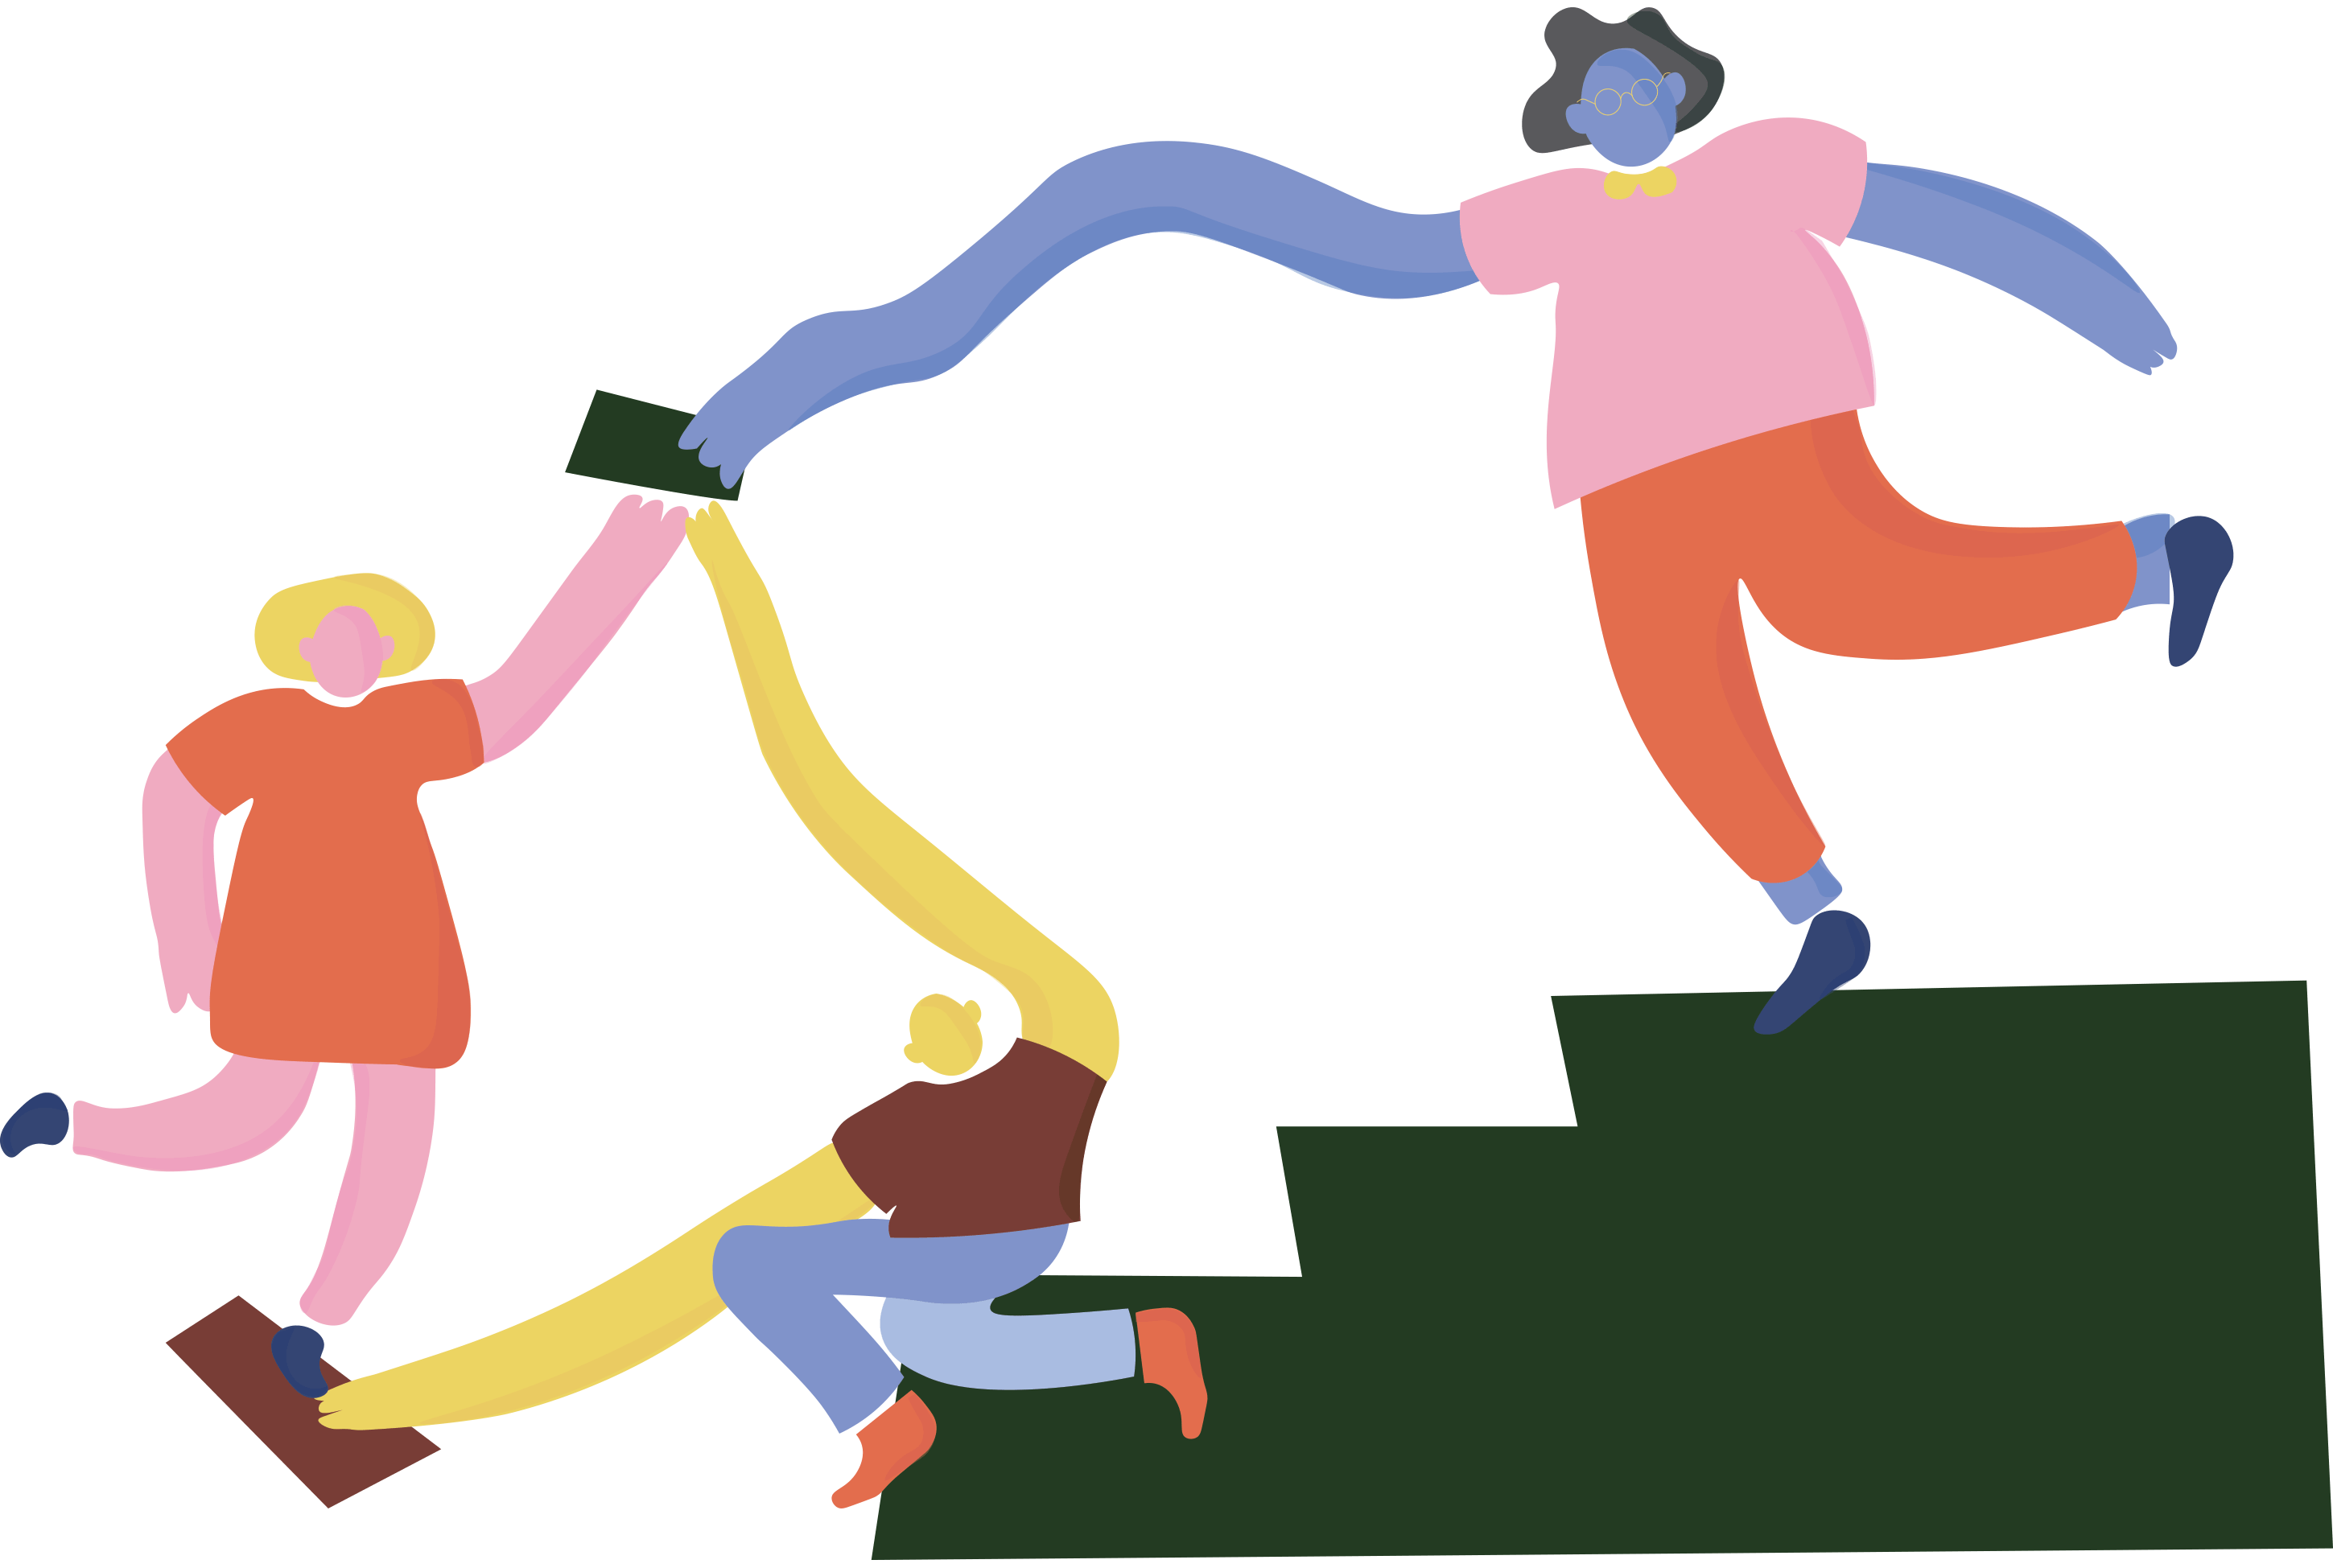 Illustration: Three people on steps supporting each other